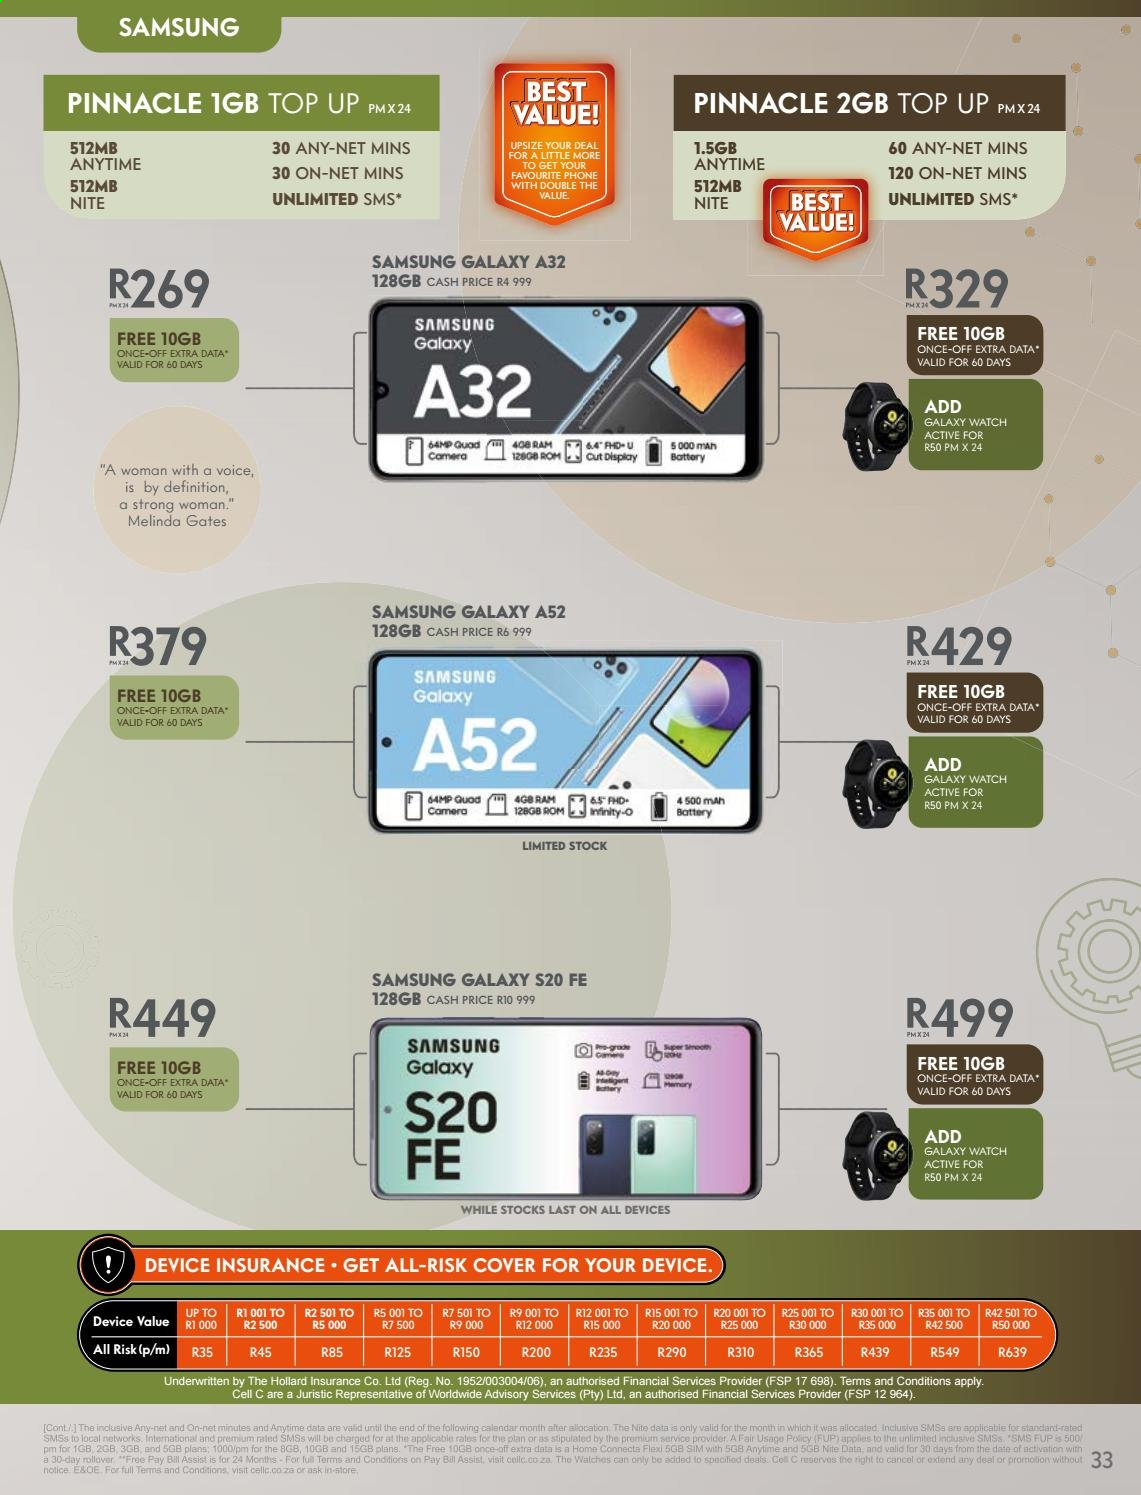 Cell C specials - 07.13.2021 - 08.31.2021. 